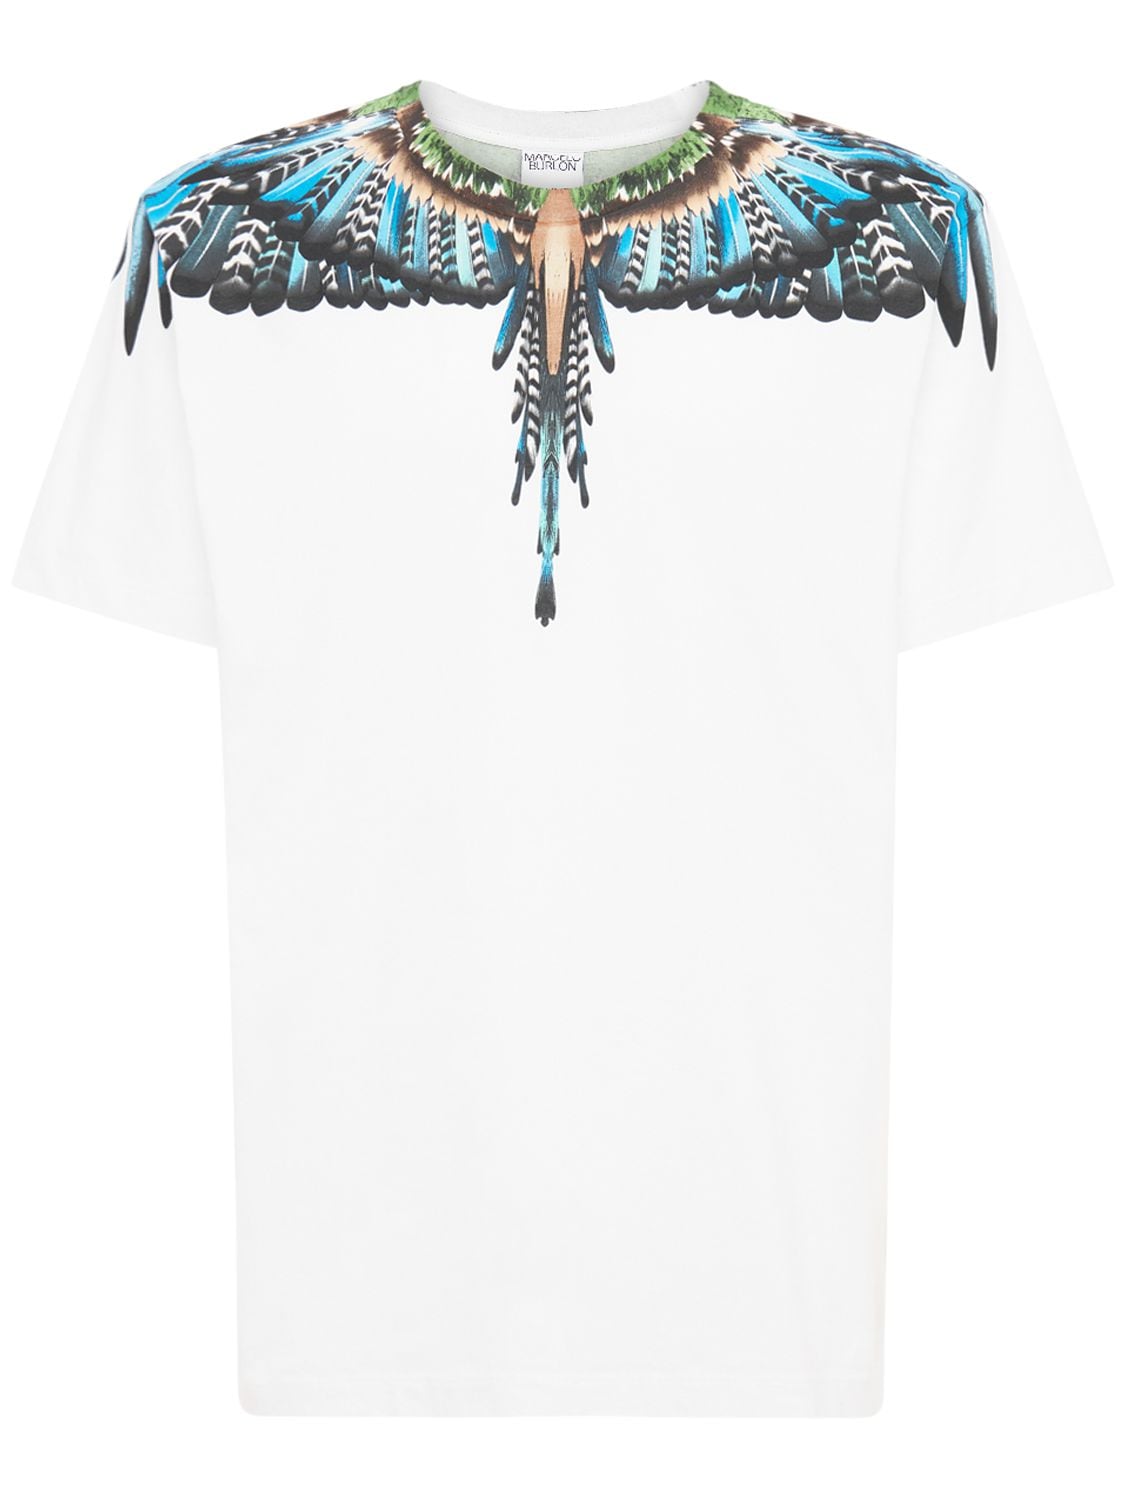 MARCELO BURLON COUNTY OF Printed Grizzly Wings | Smart Closet